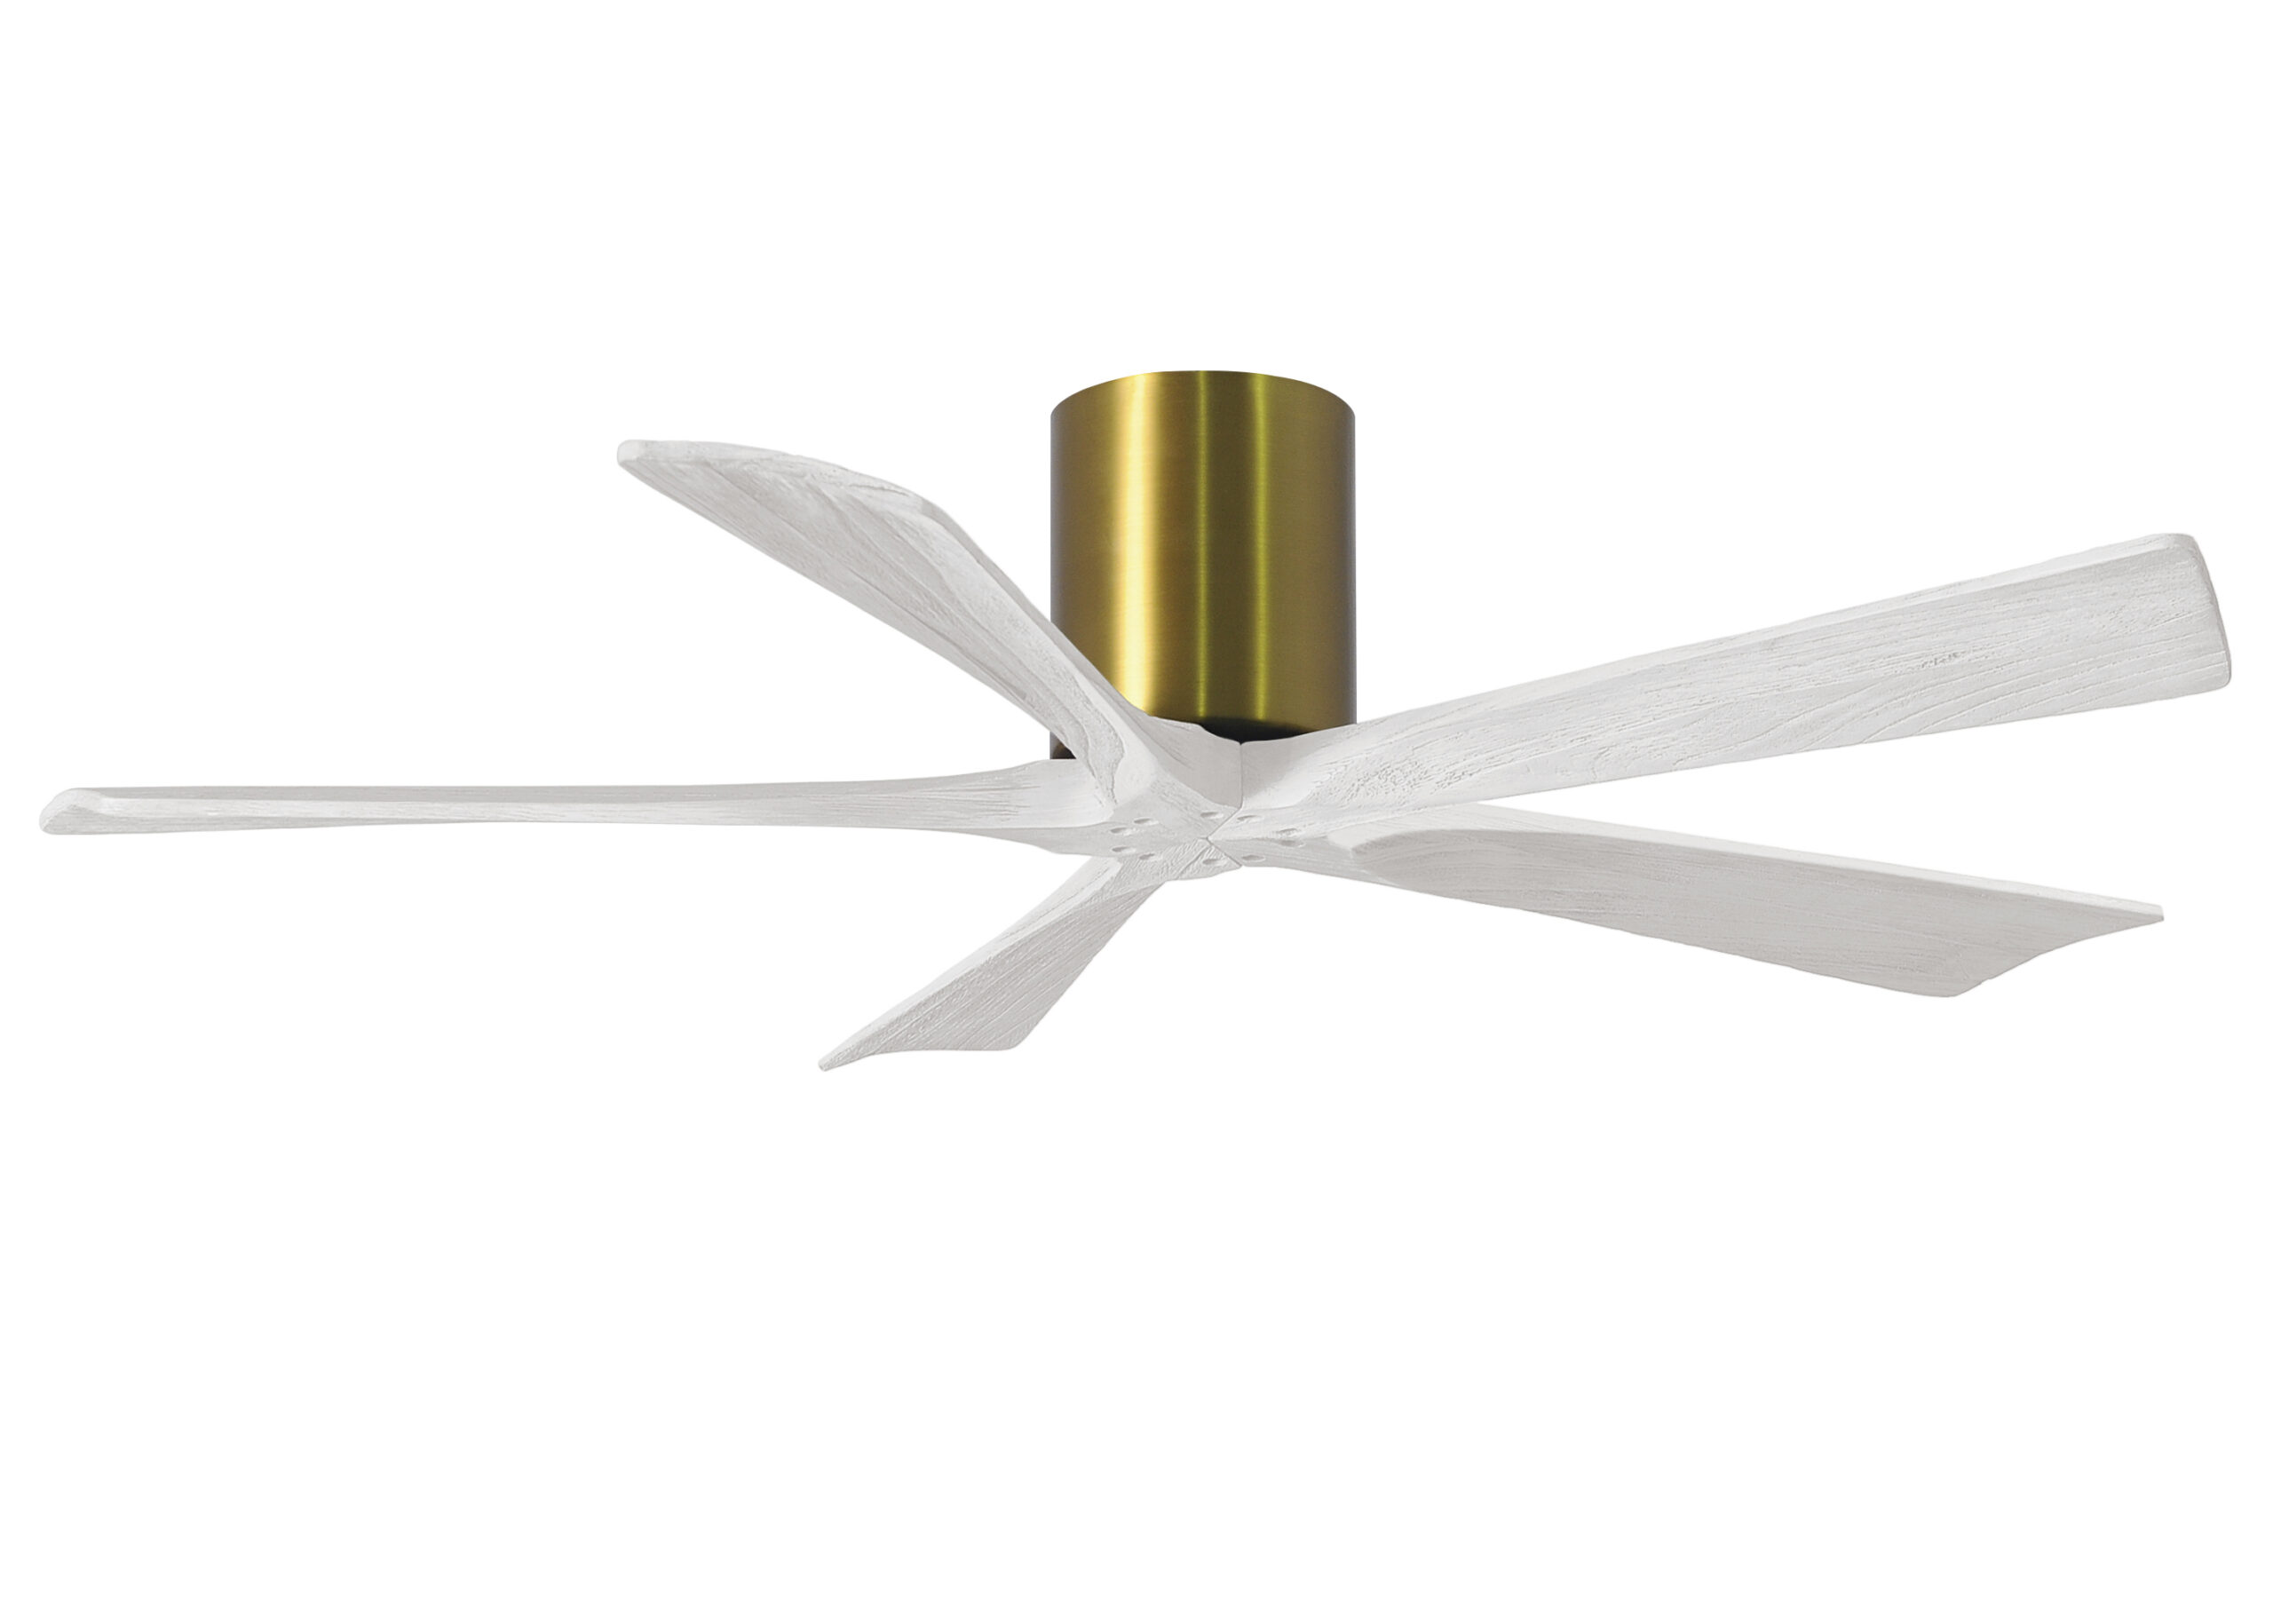 Irene-5H Ceiling Fan in Brushed Brass Finish with 52